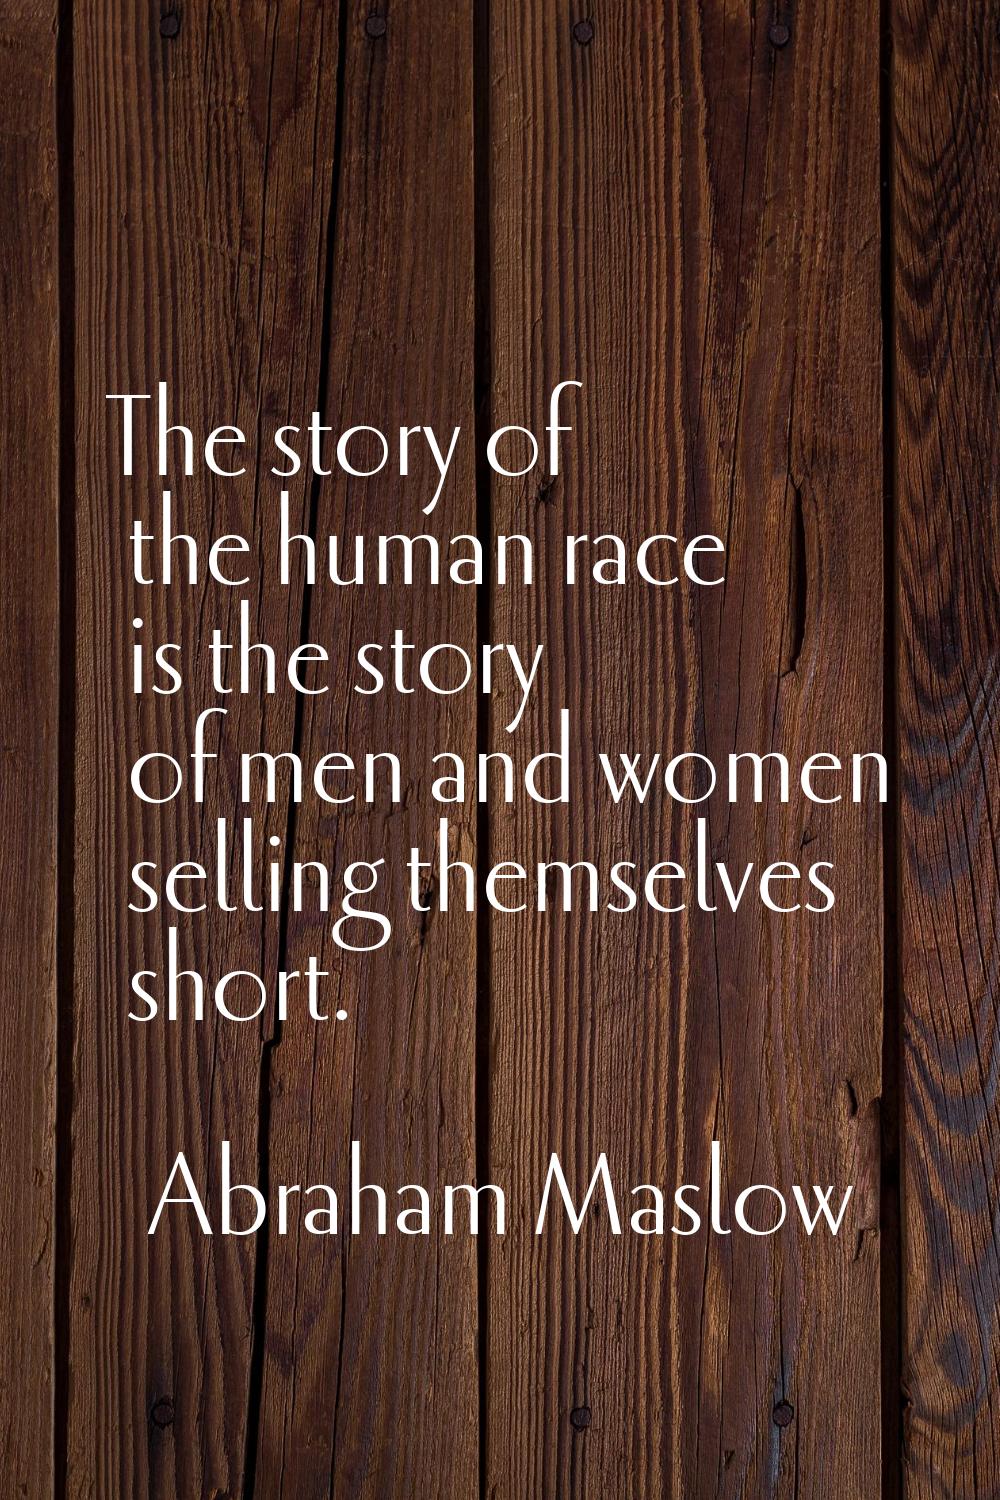 The story of the human race is the story of men and women selling themselves short.